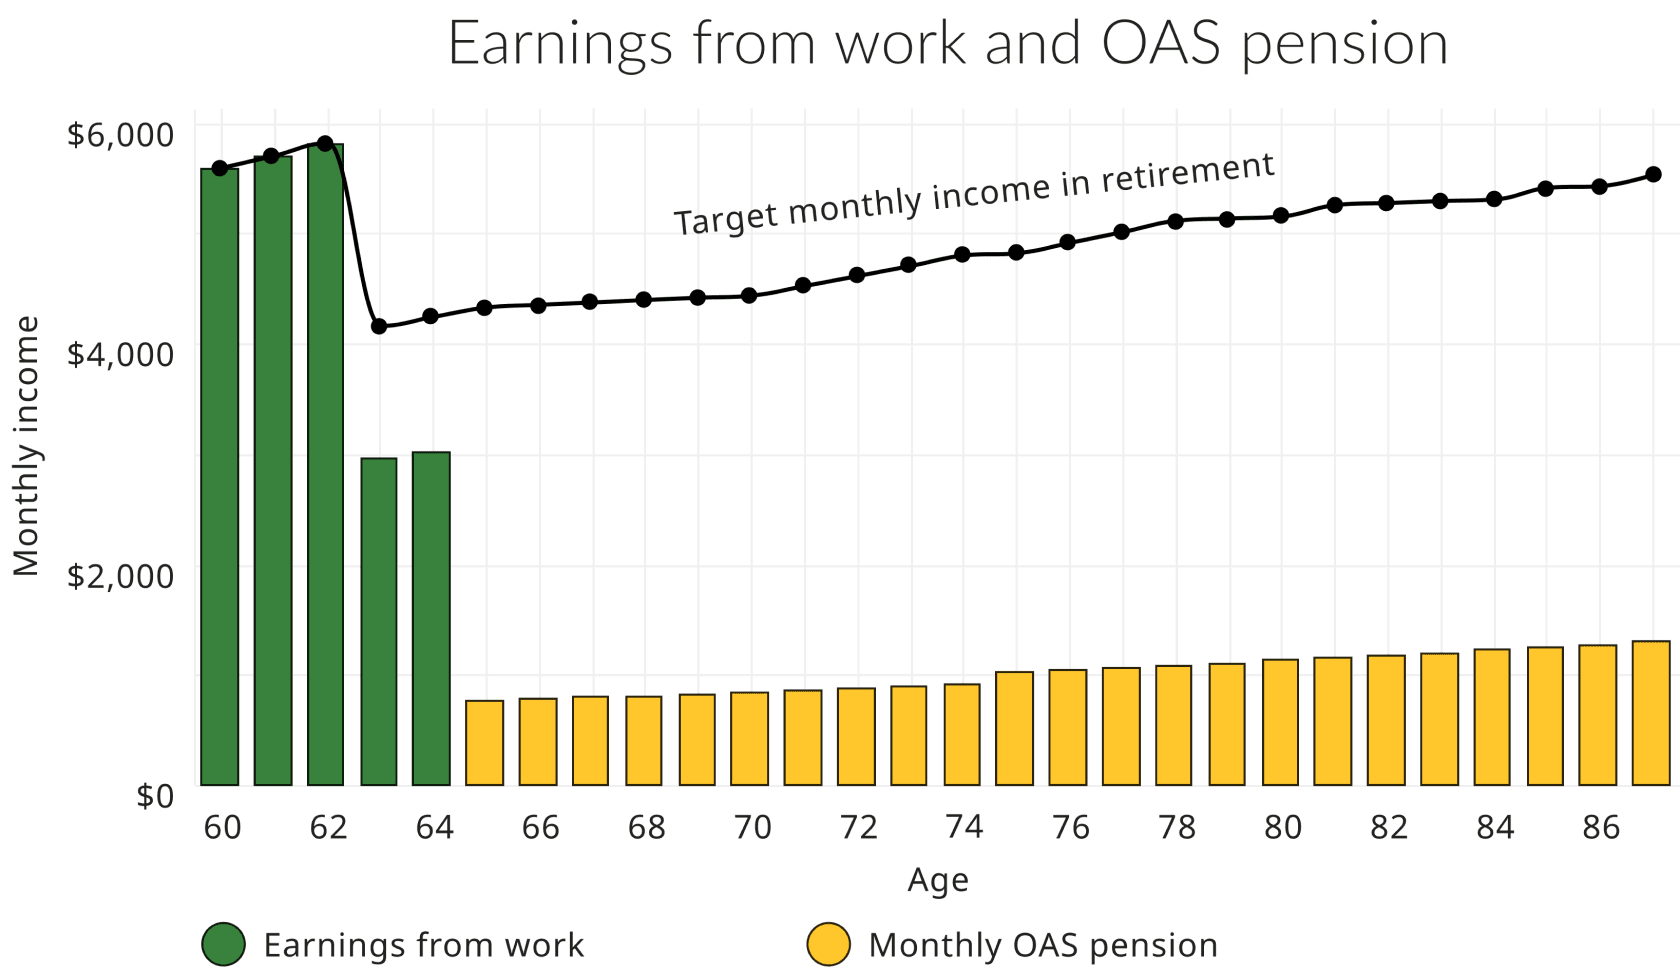 This chart shows two sources of income that Bonnie can use from age 60 to 88 for reaching her target monthly income. One is her earnings from work and the other is her OAS pension. Bonnie works full time until age 62 and meets her target monthly income. At age 63 she goes part-time, and her monthly income is half of what it used to be. The chart shows Bonnie starting her OAS pension at age 65. From age 65 and on, Bonnie continues to use her monthly OAS pension to help her reach her target monthly income. There's still a large gap between her monthly OAS pension and her target monthly income.